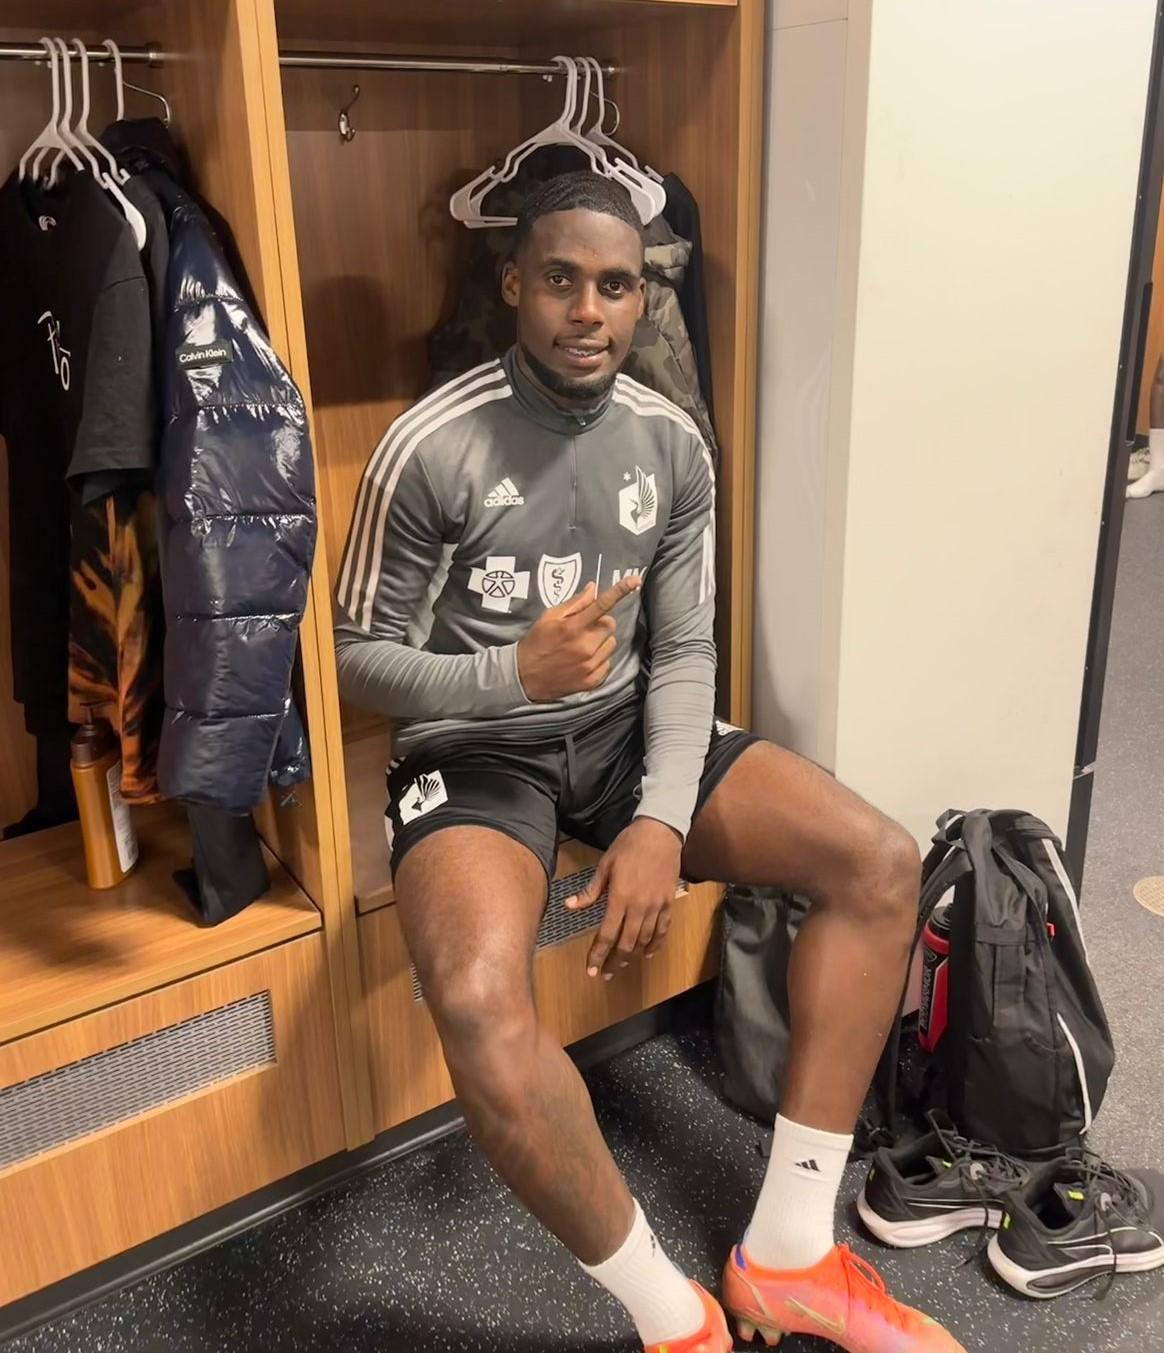 Guyana’s Jeremy Garrett sharing a light moment in the dressing room of Minnesota United following his first day of training with the MLS Club at Allianz Field, St Paul.